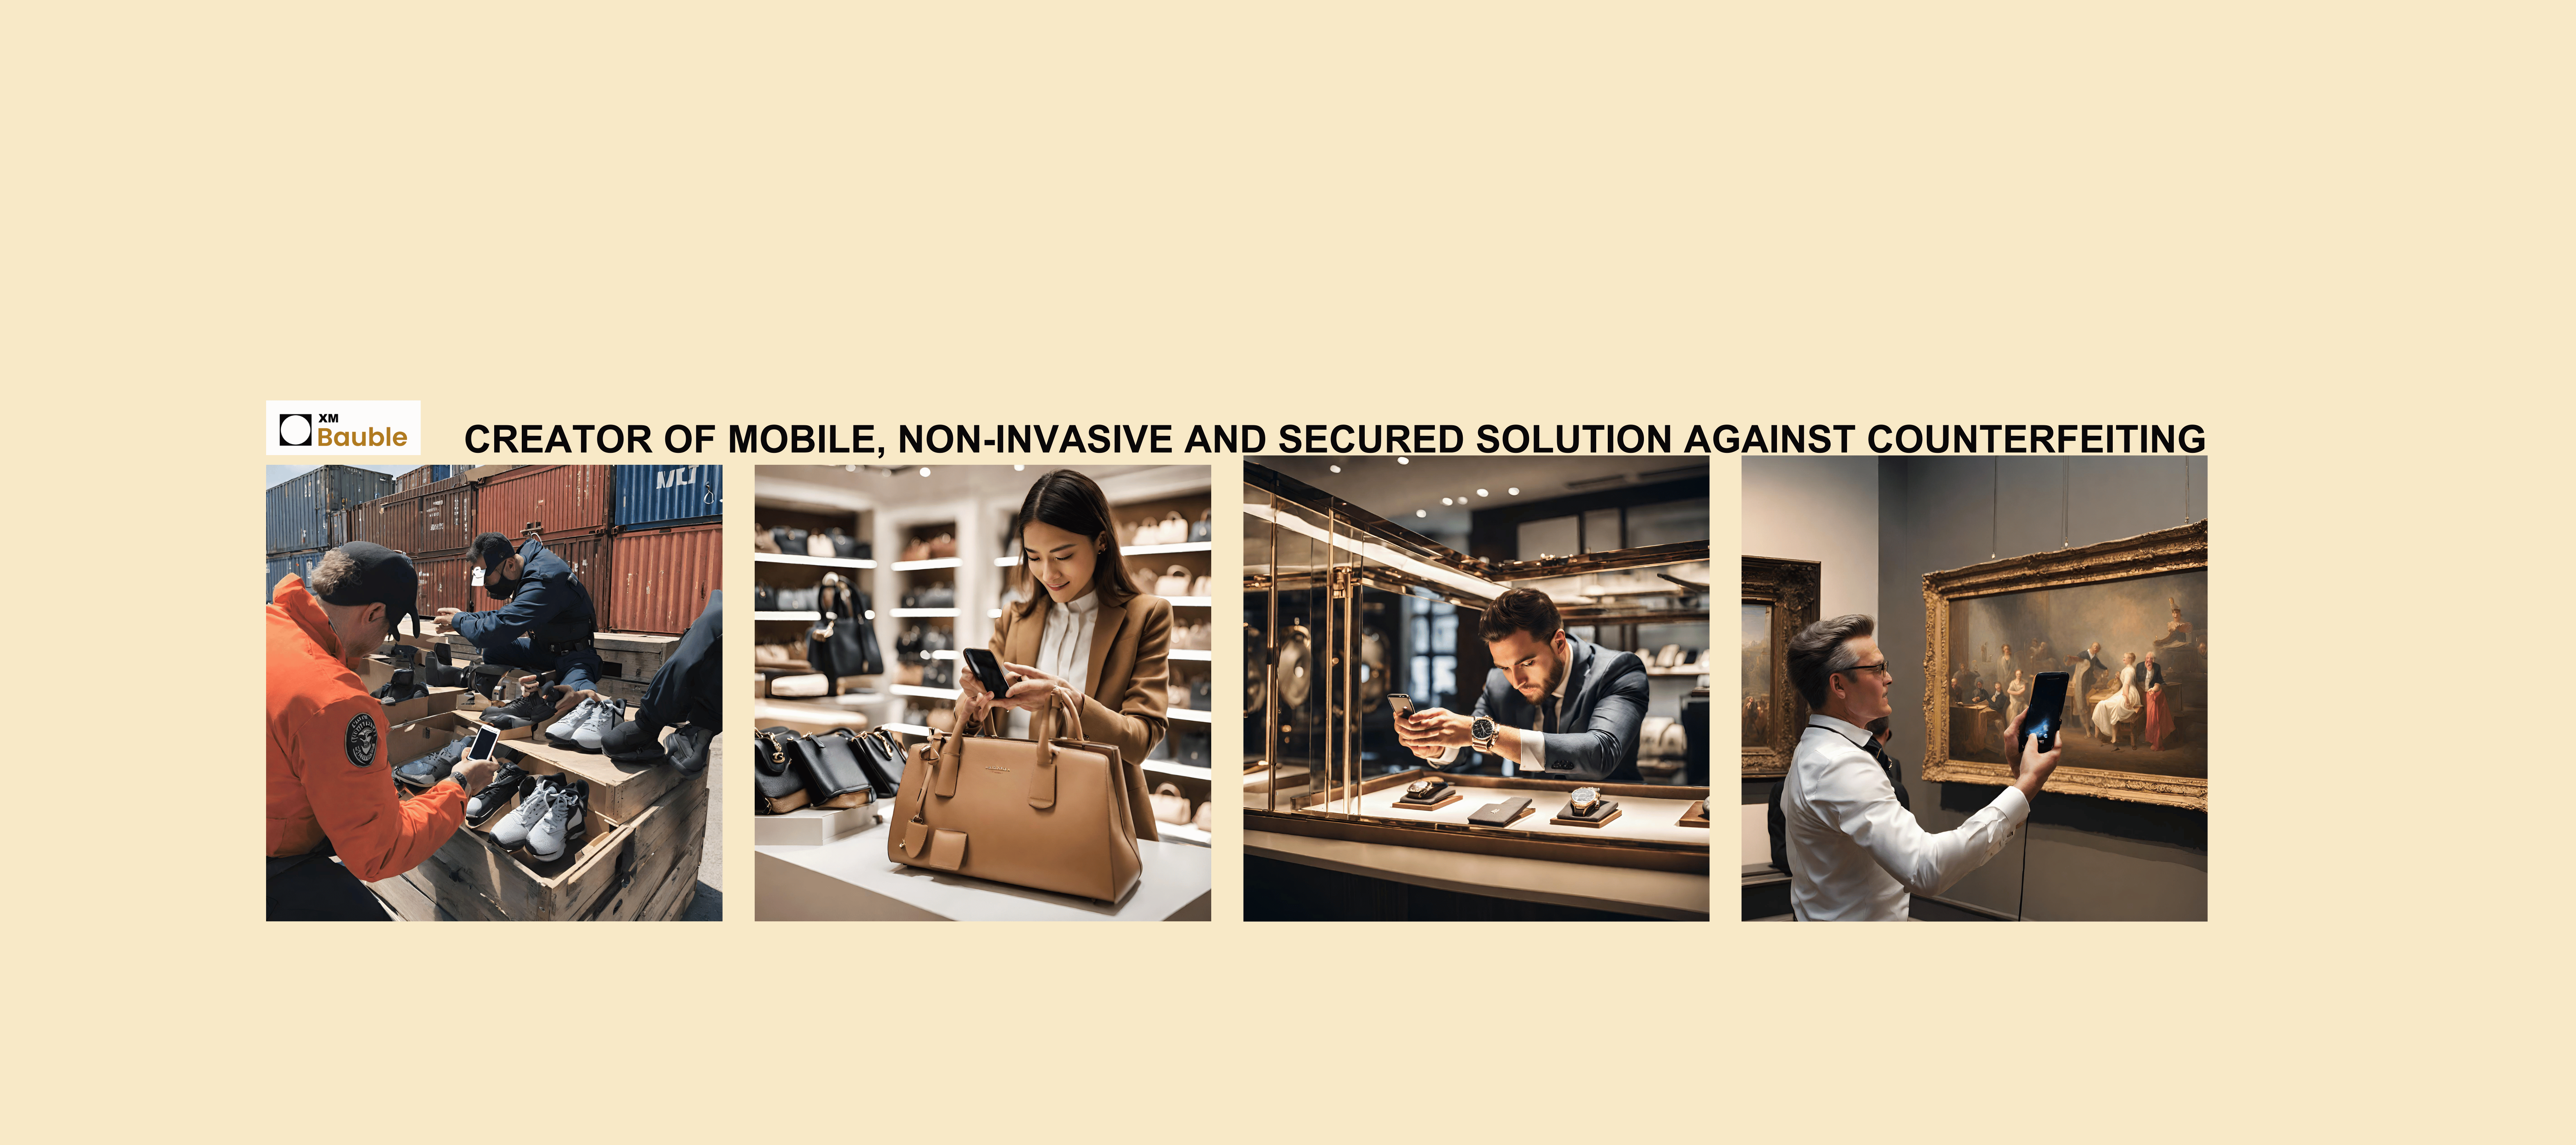 Mobile, non-invasive and secured solution against counterfeiting 